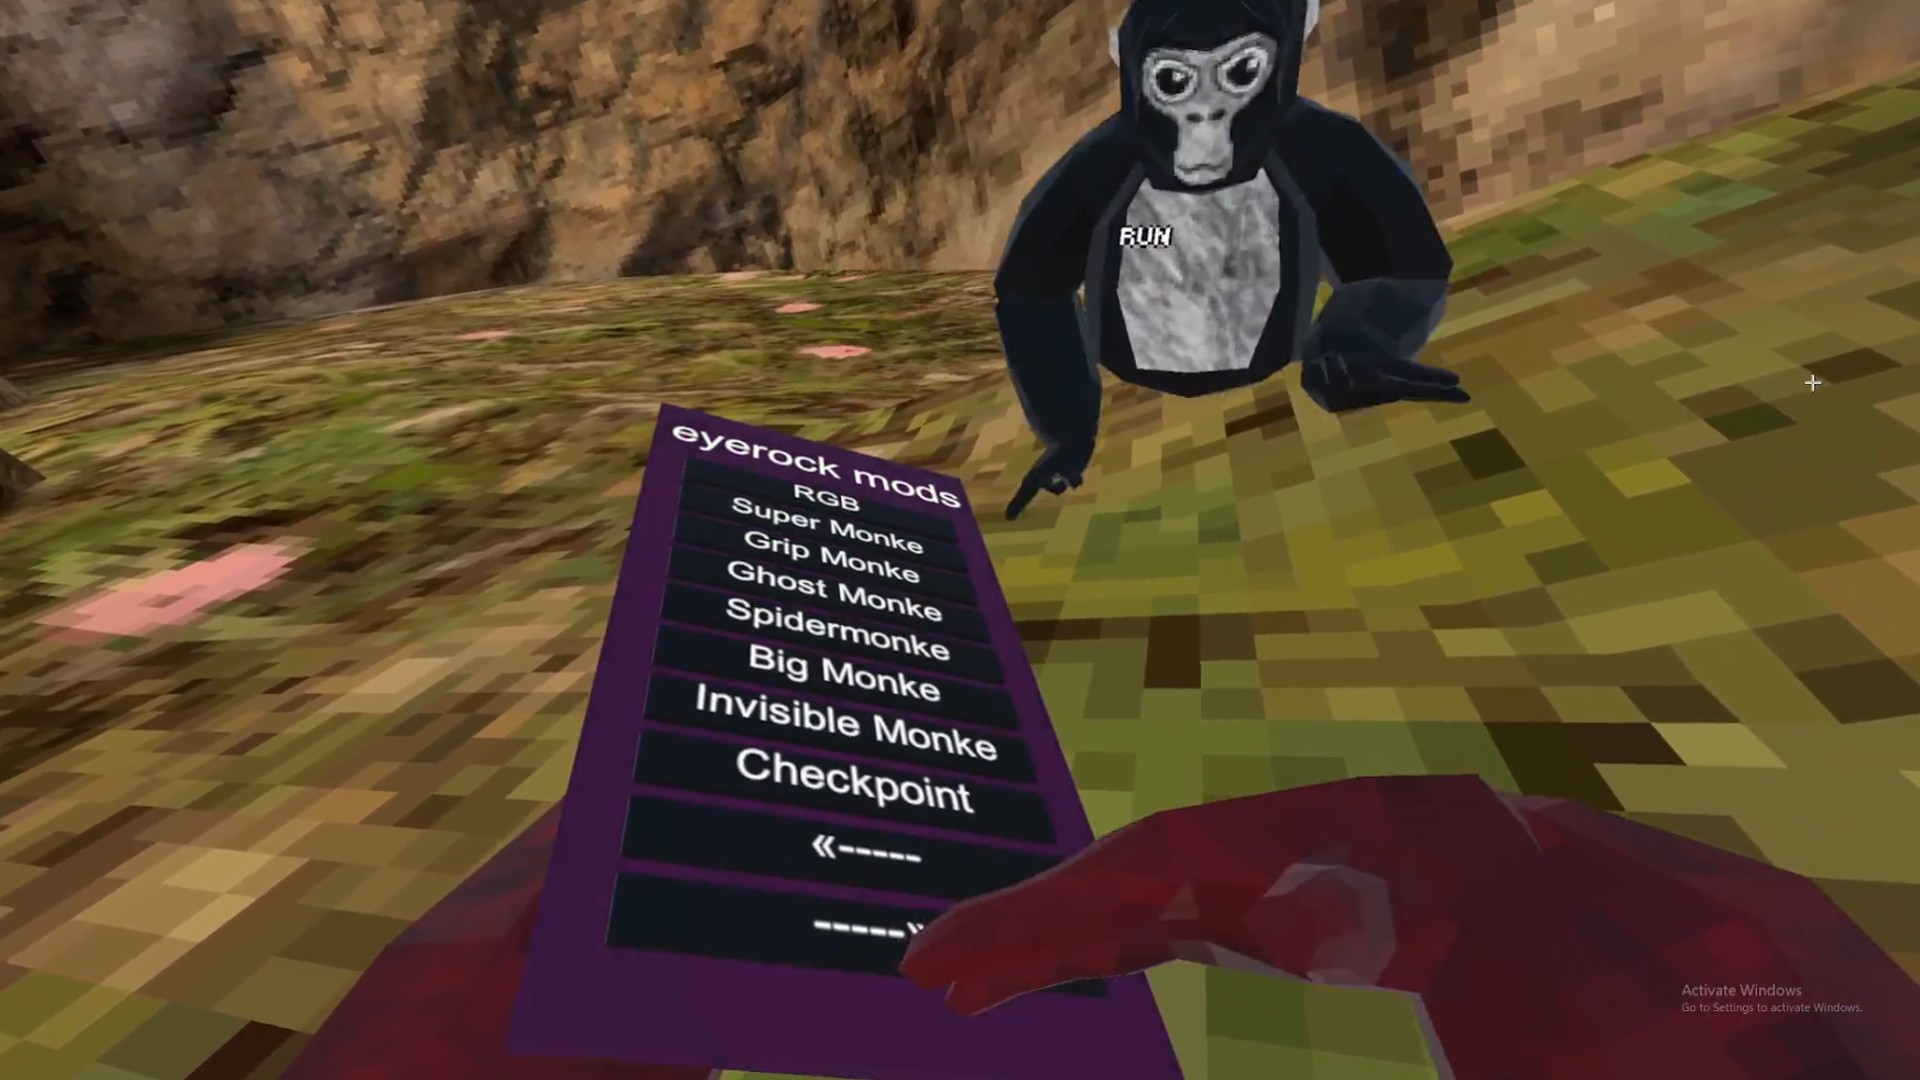 Mods for Gorilla Tag APK for Android Download